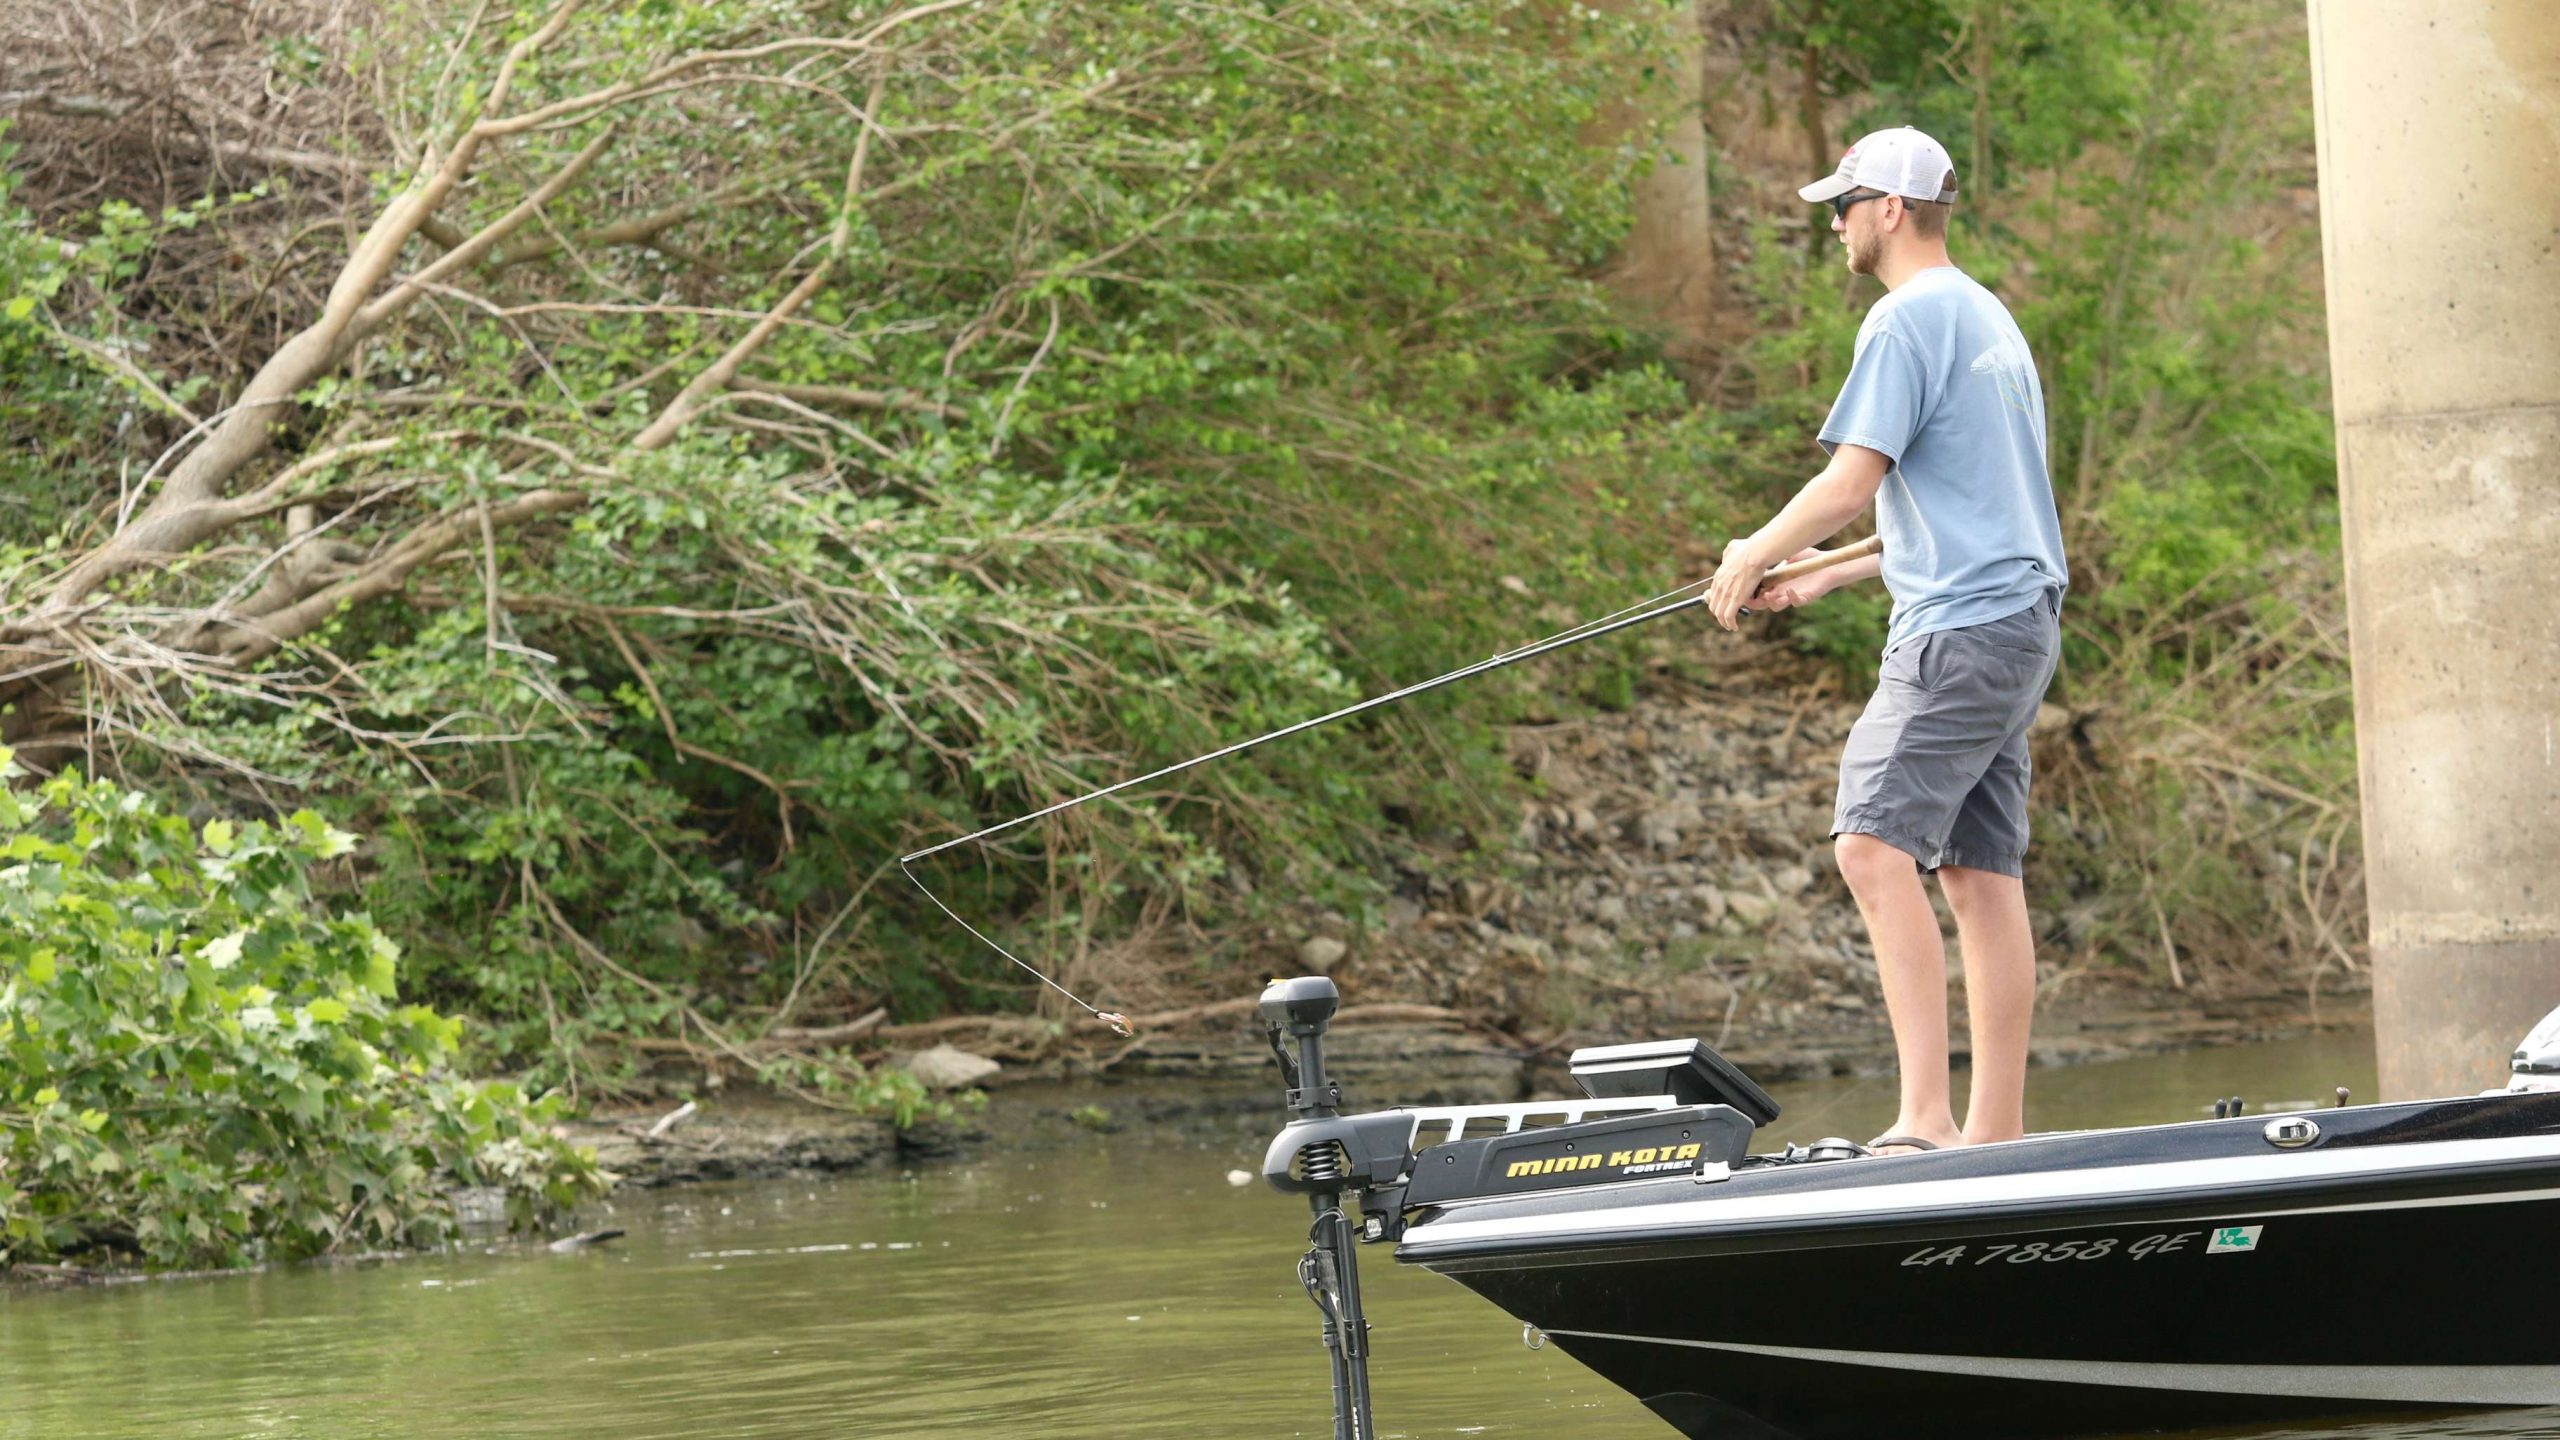  There are plenty of bridge pilings to fish in this tournament. Chance Havard tried casting between a bridge piling and a rock bank to no avail.